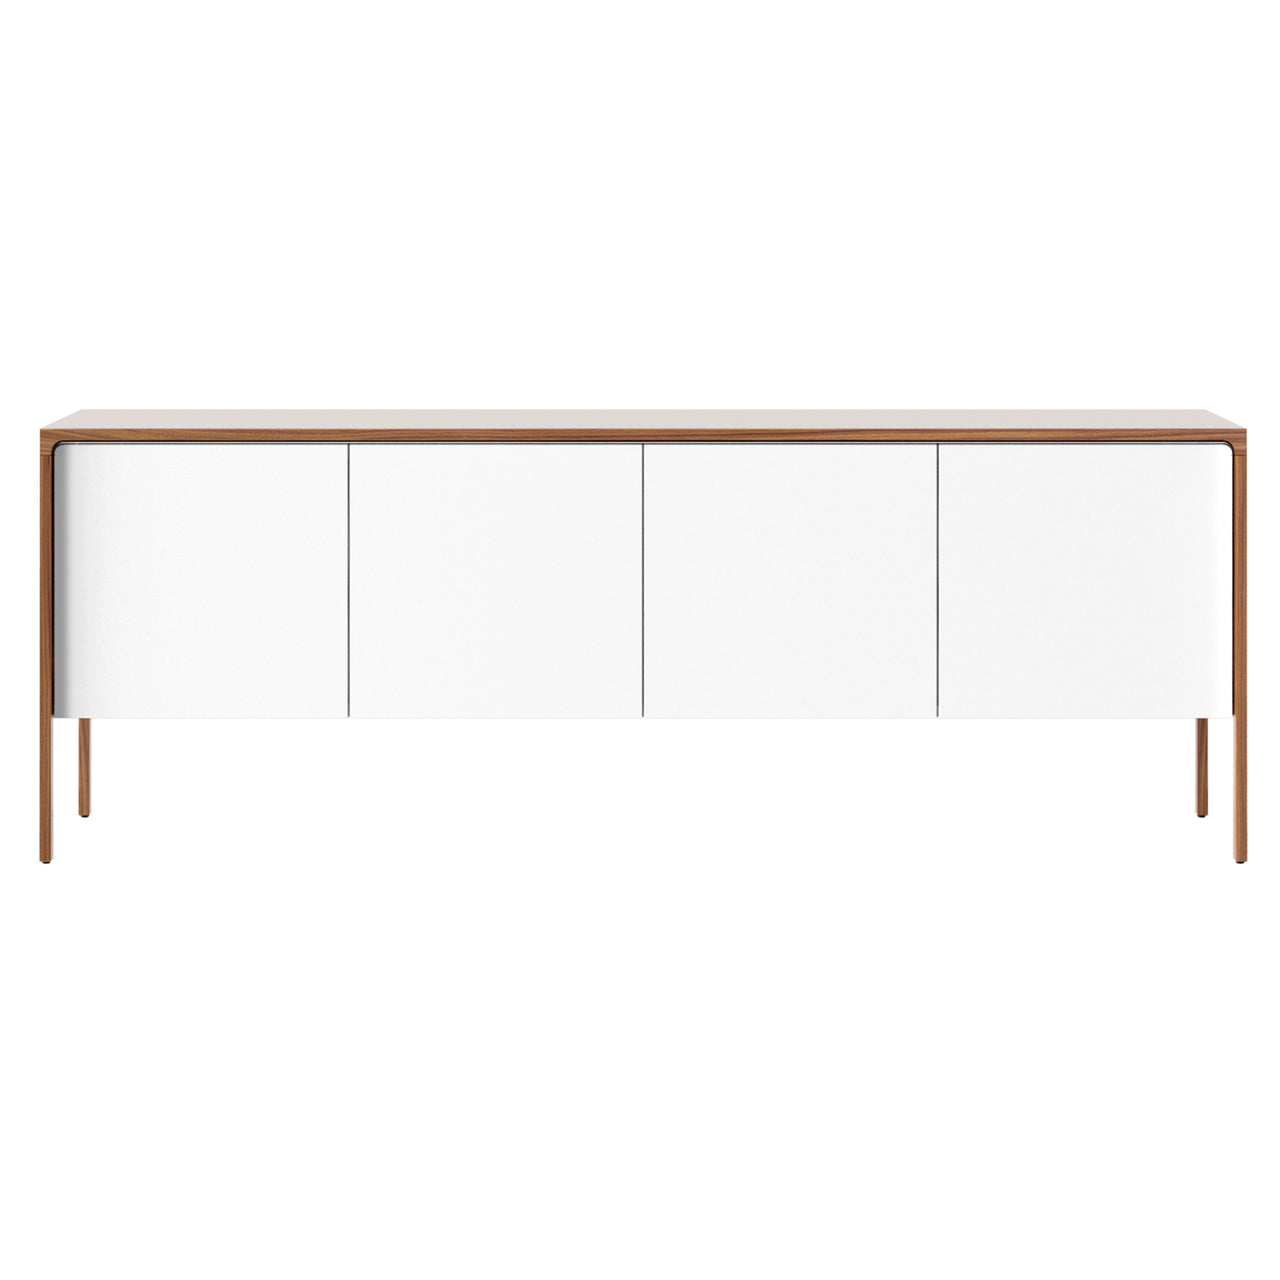 Tactile Sideboard: TAC215 + White Texturised Lacquered